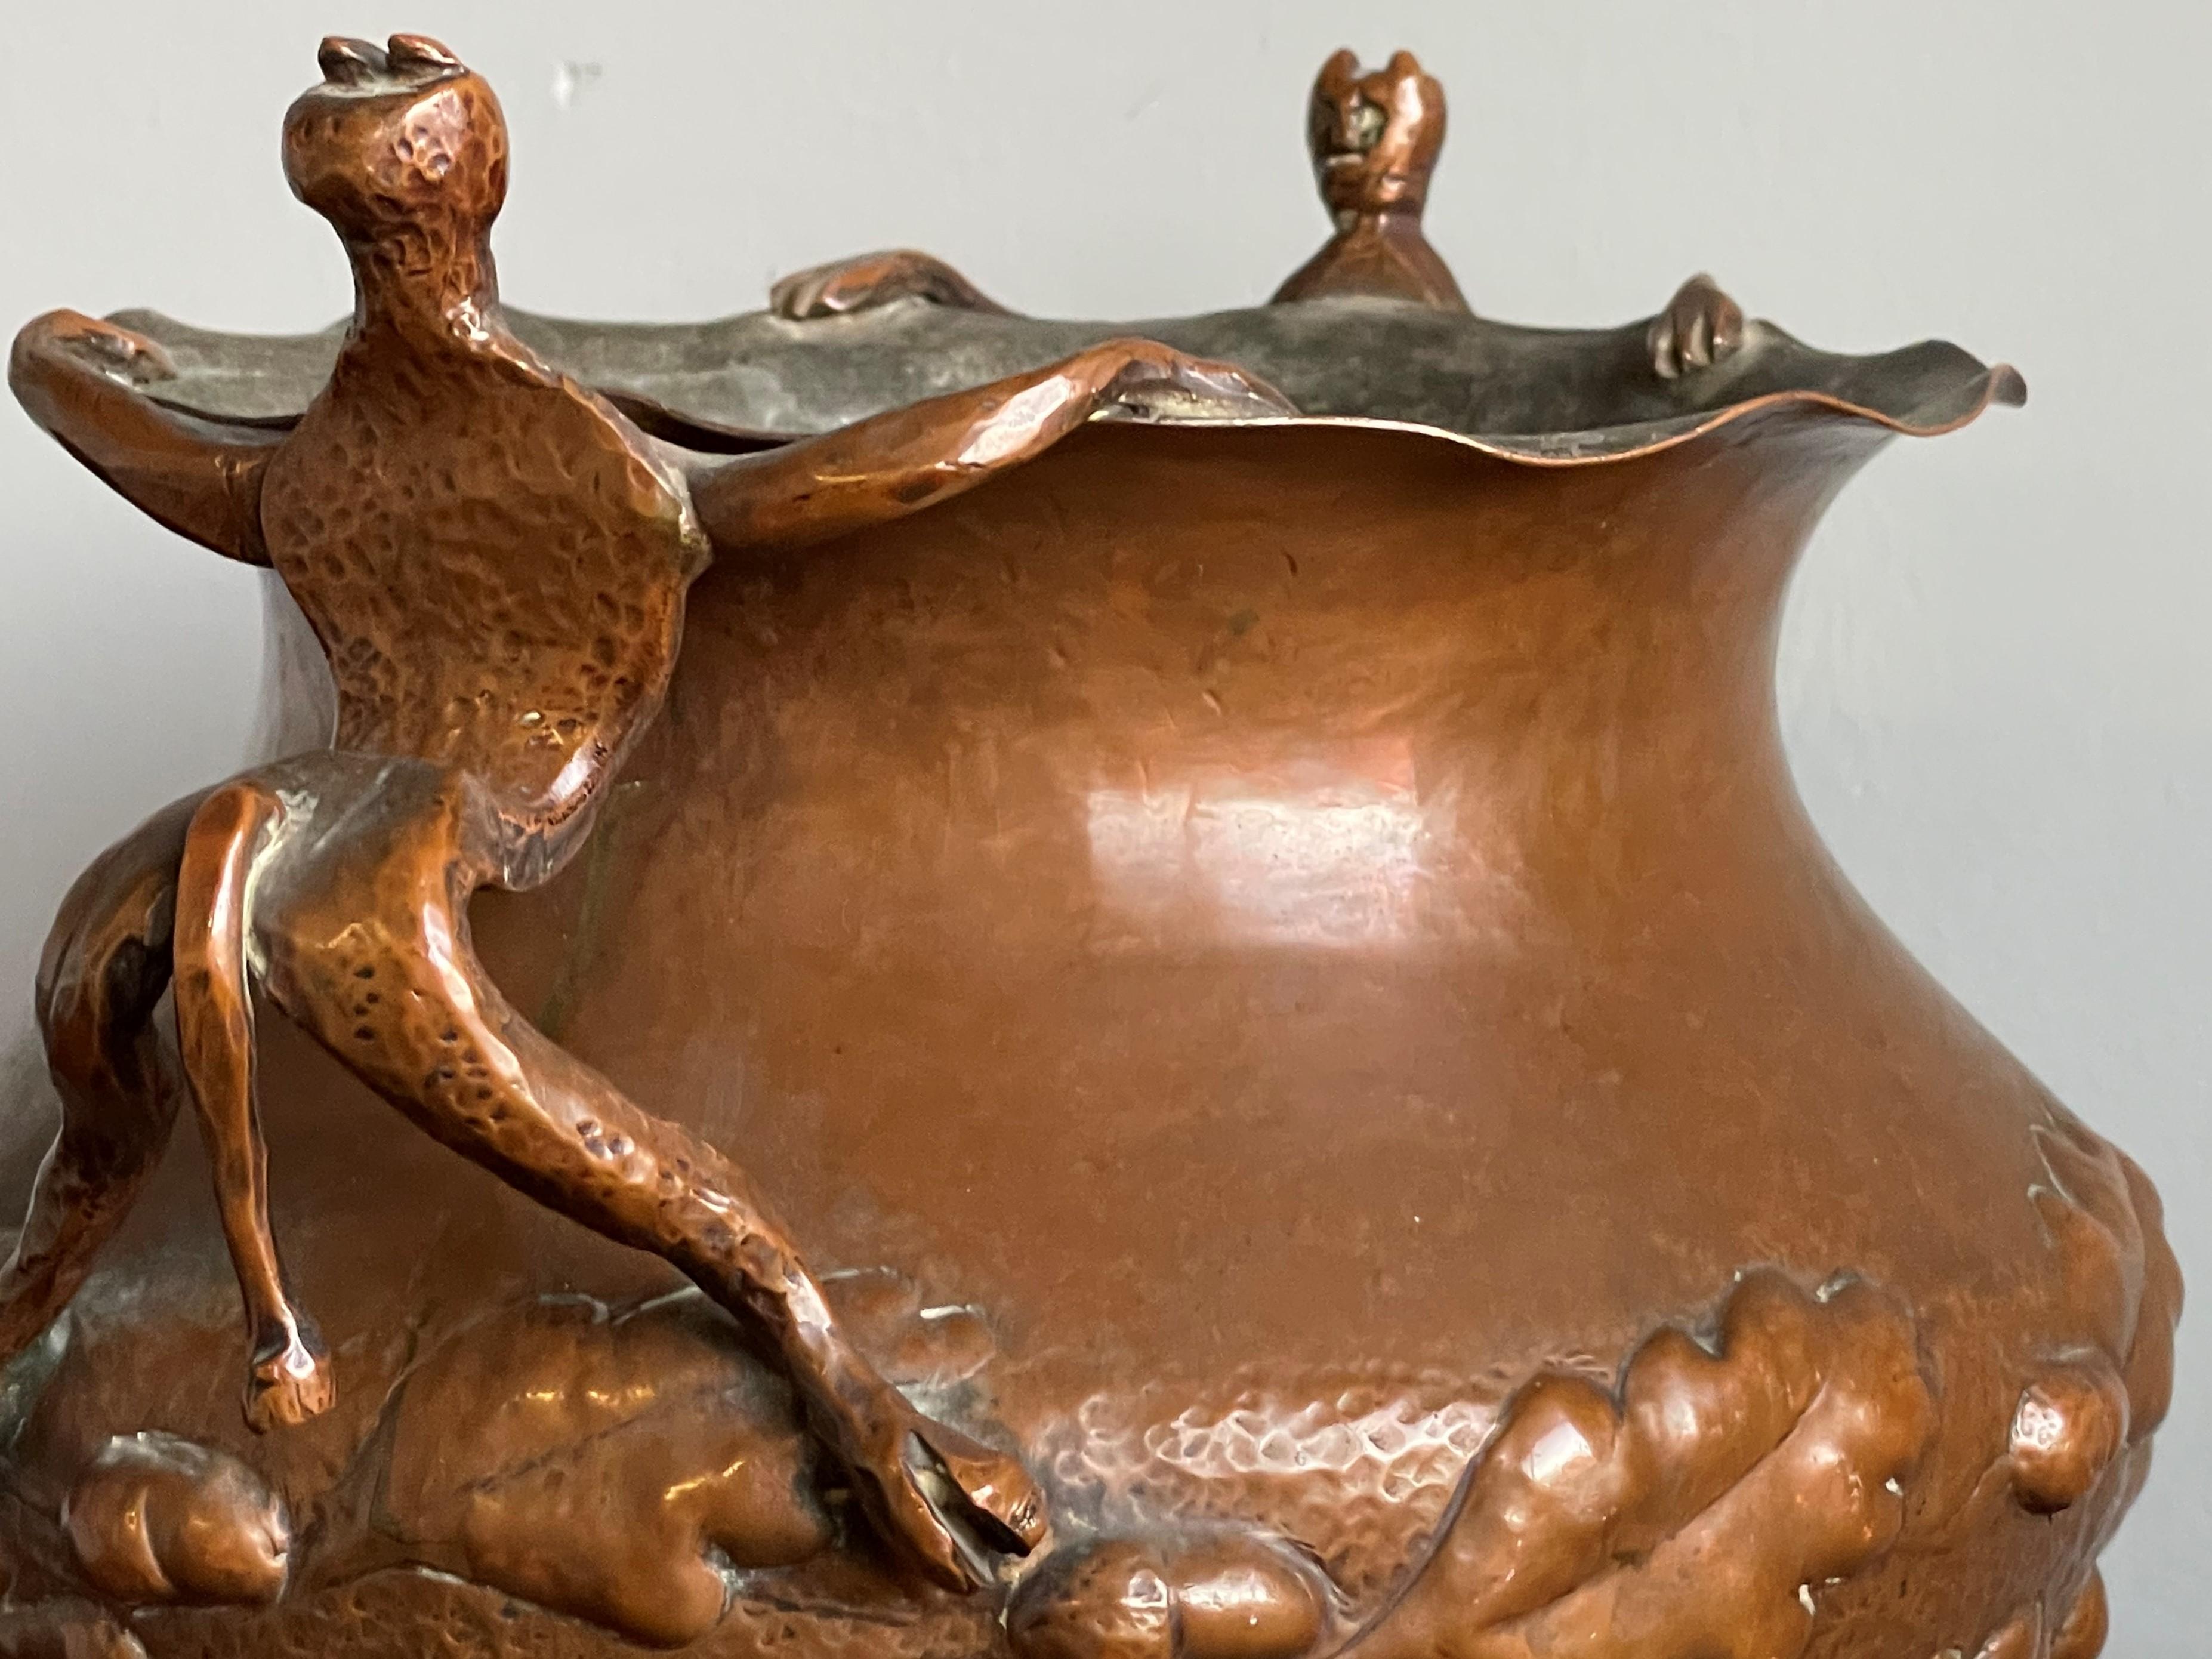 Unique Mid 1800s Embossed Copper Planter / Vase with Satyr Sculptures as Handles For Sale 3